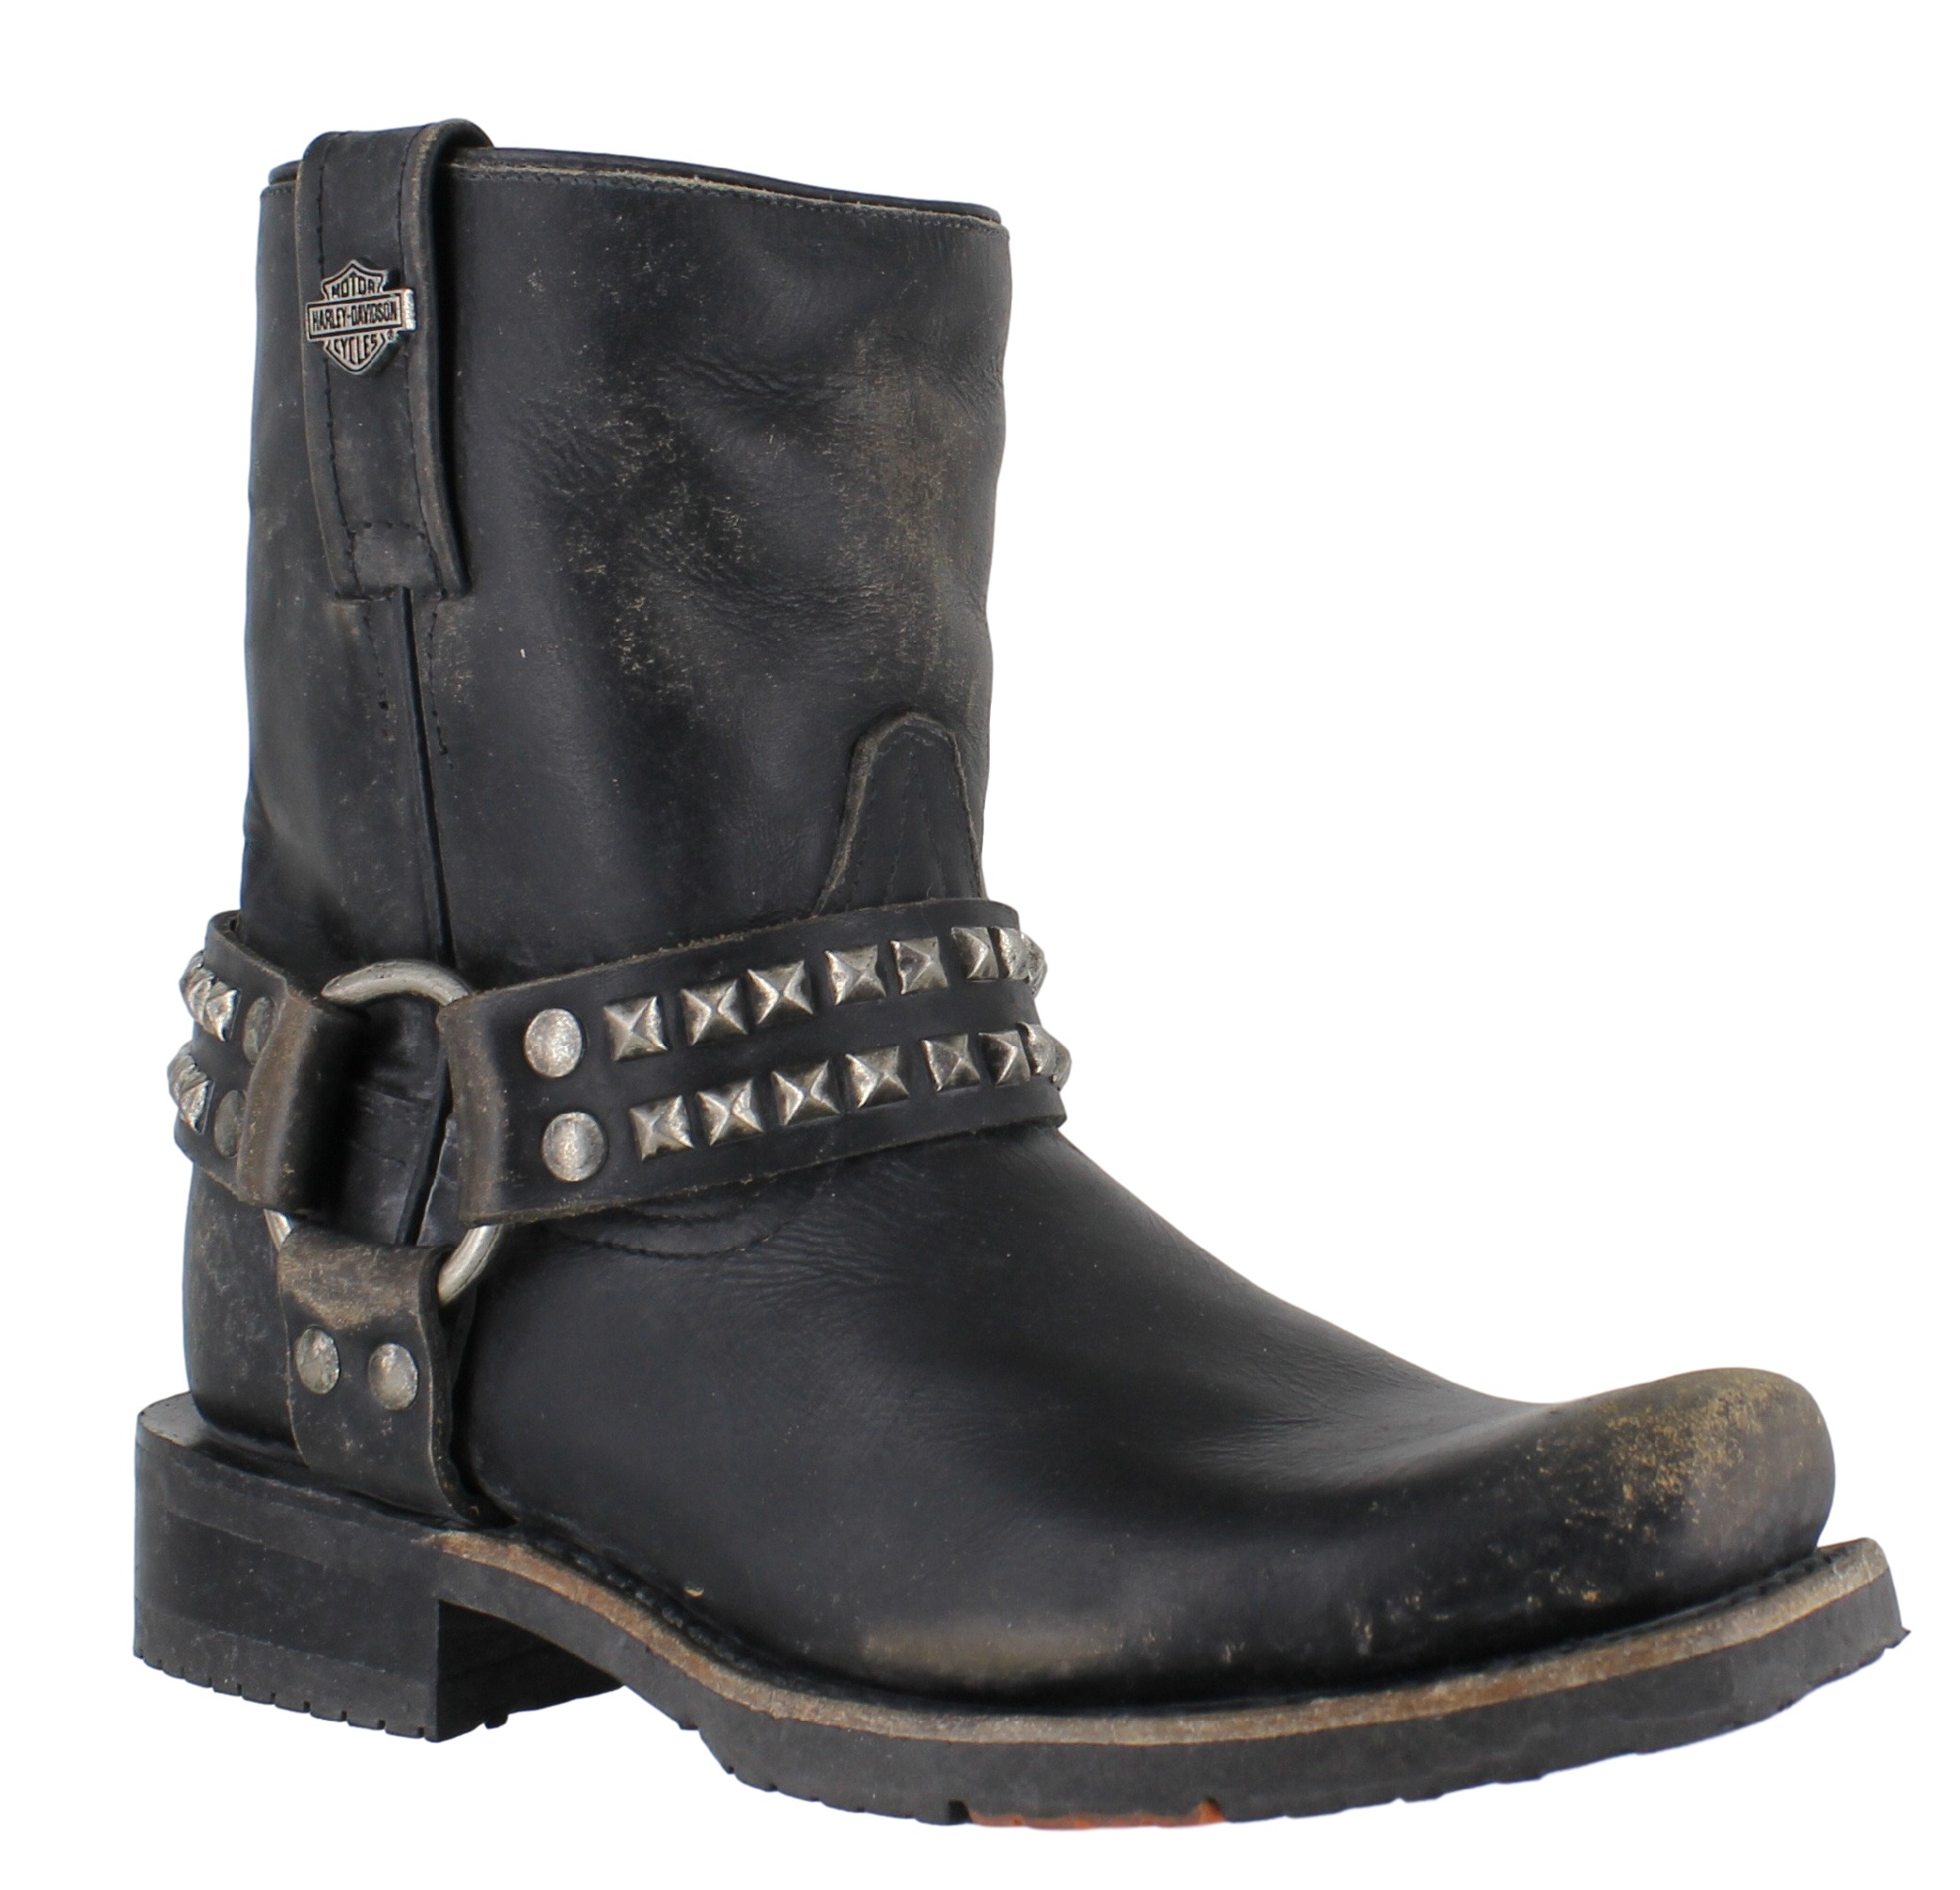 Womens Harley Davidson Katerina Stud Harness Black Zip Up Ankle Boots ...